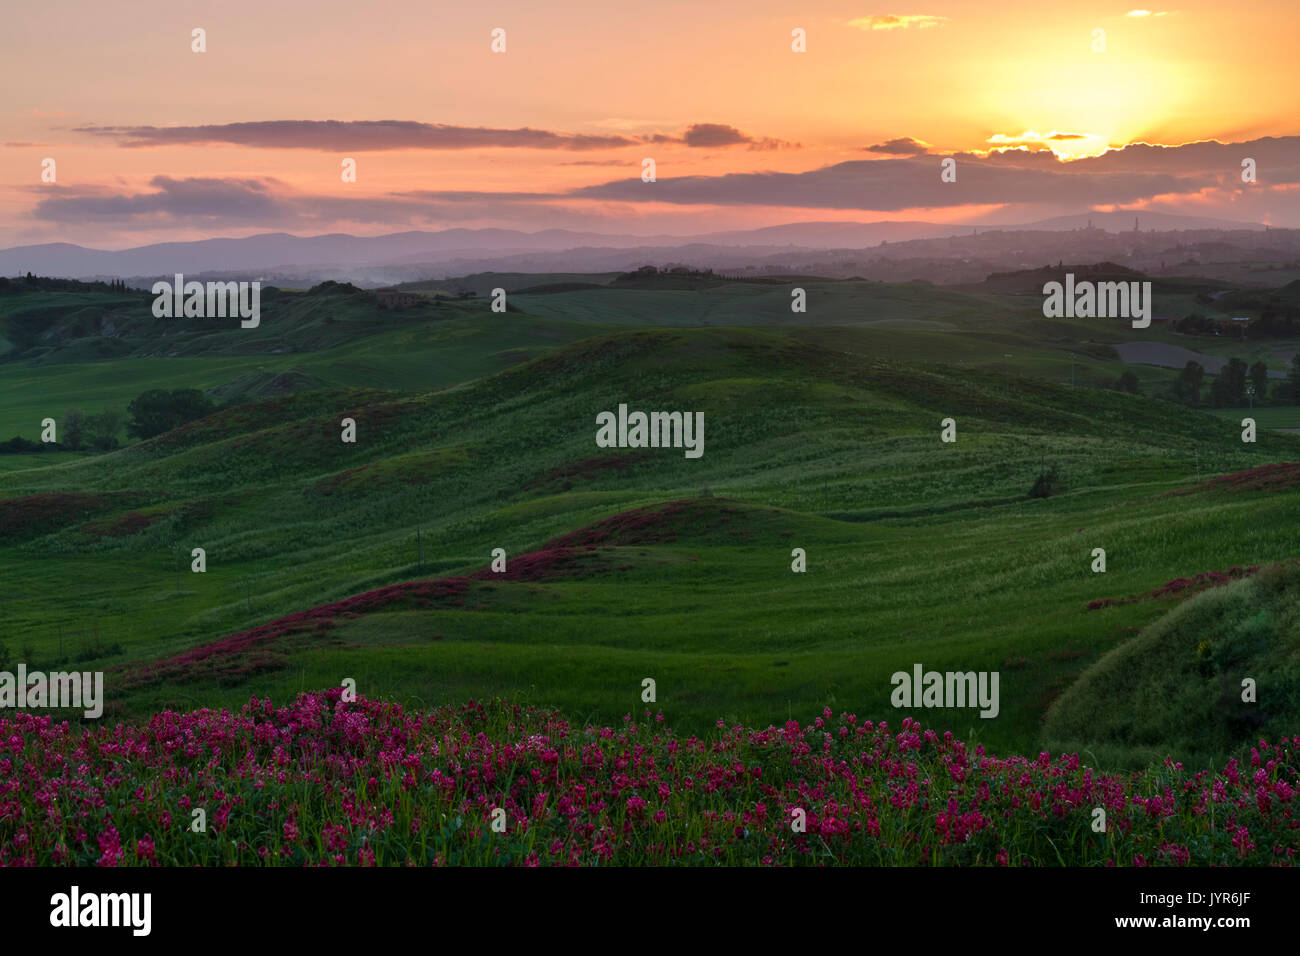 The sun sets over Siena seen in the distance from a flower field in the surrounding countryside, near Asciano, Val d'Orcia, Tuscany, Italy. Stock Photo